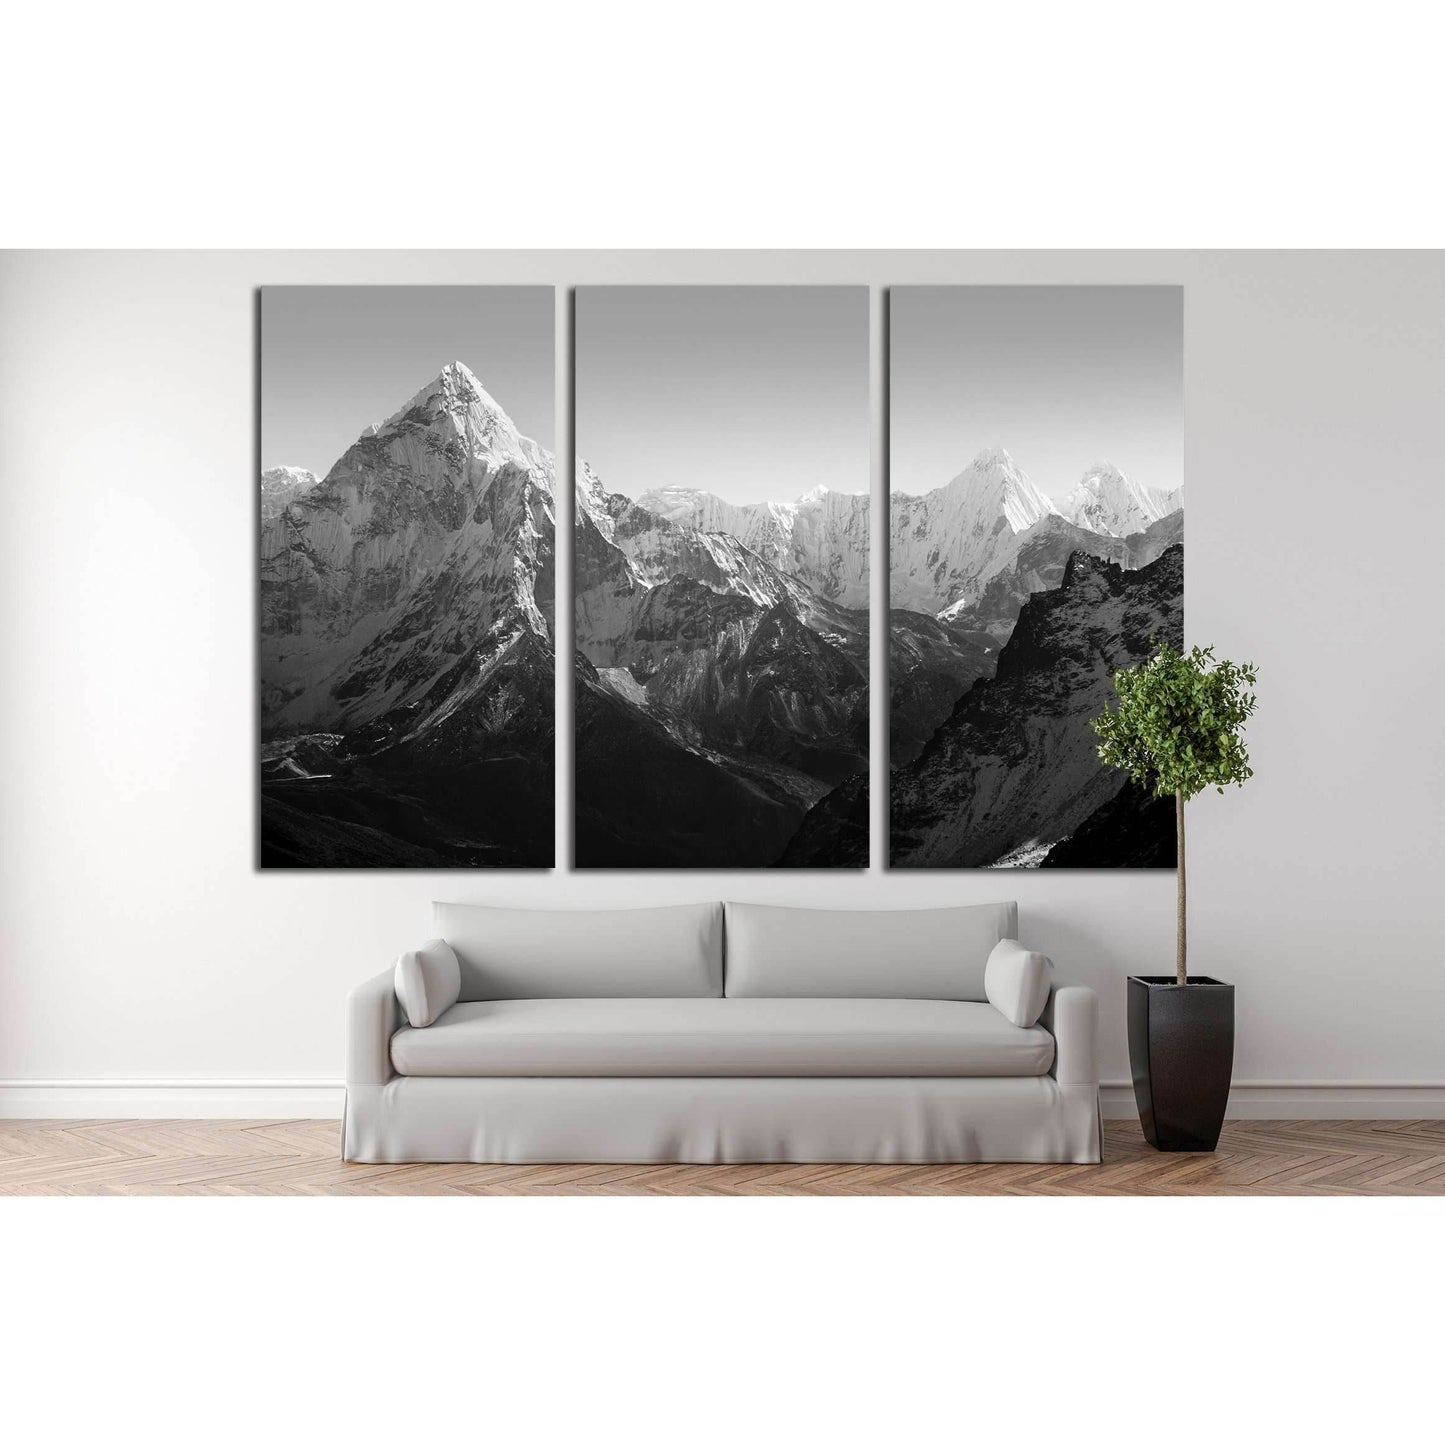 Everest's Peaks: Black and White Wall DecorThis canvas print captures the awe-inspiring grandeur of Mount Everest in monochrome, highlighting the mountain's dramatic contours and peaks. An excellent choice for wall art, this print would bring a sense of a